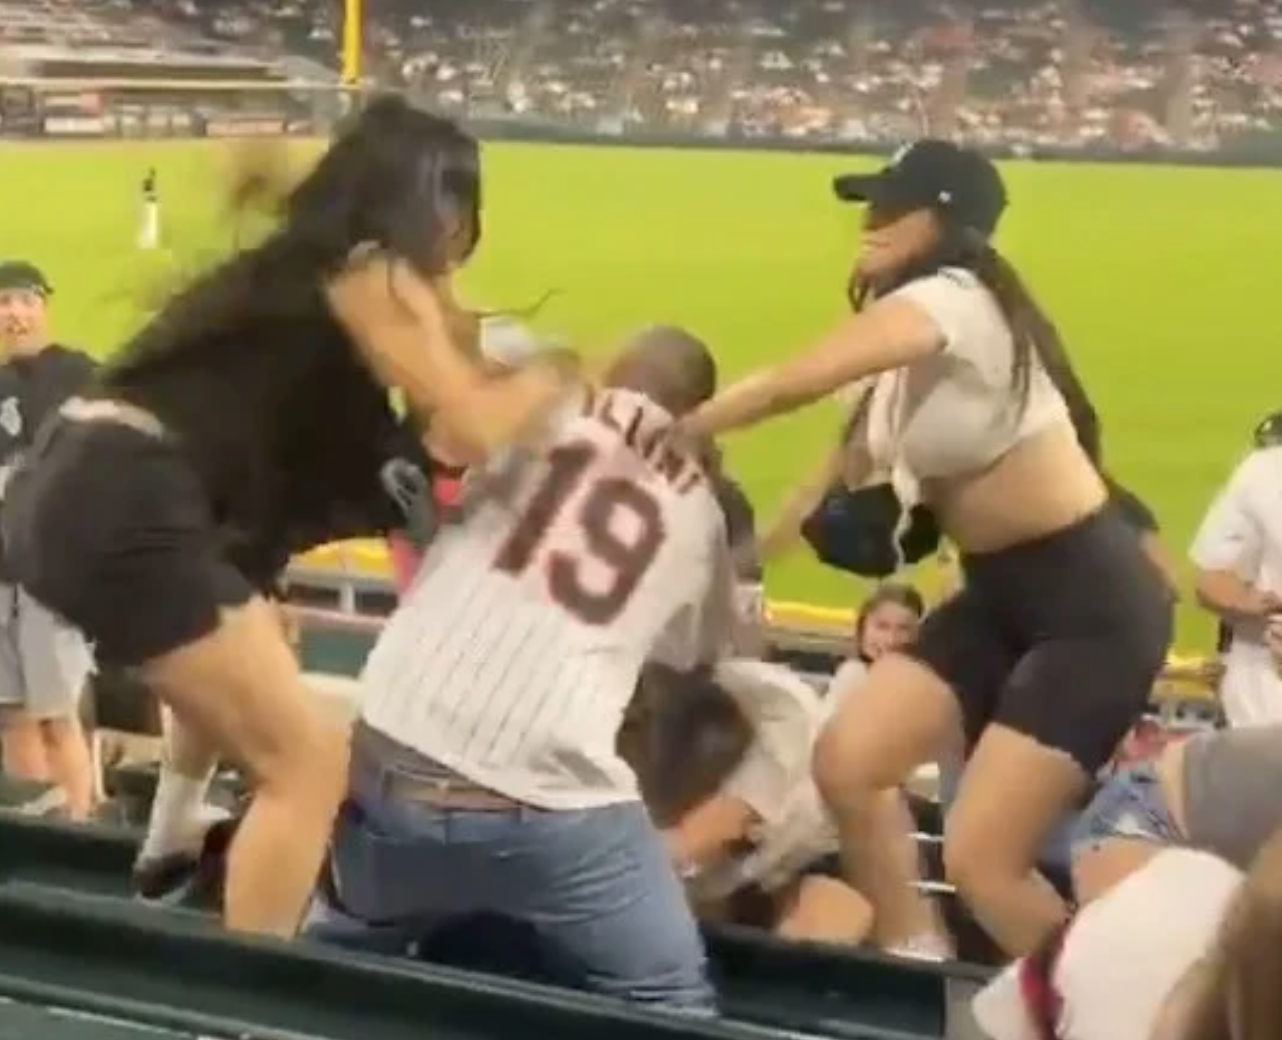 Meanwhile in Chicago: Cat Fight Breaks Out at Wild Sox-Cardinals Game, America’s True Pastime